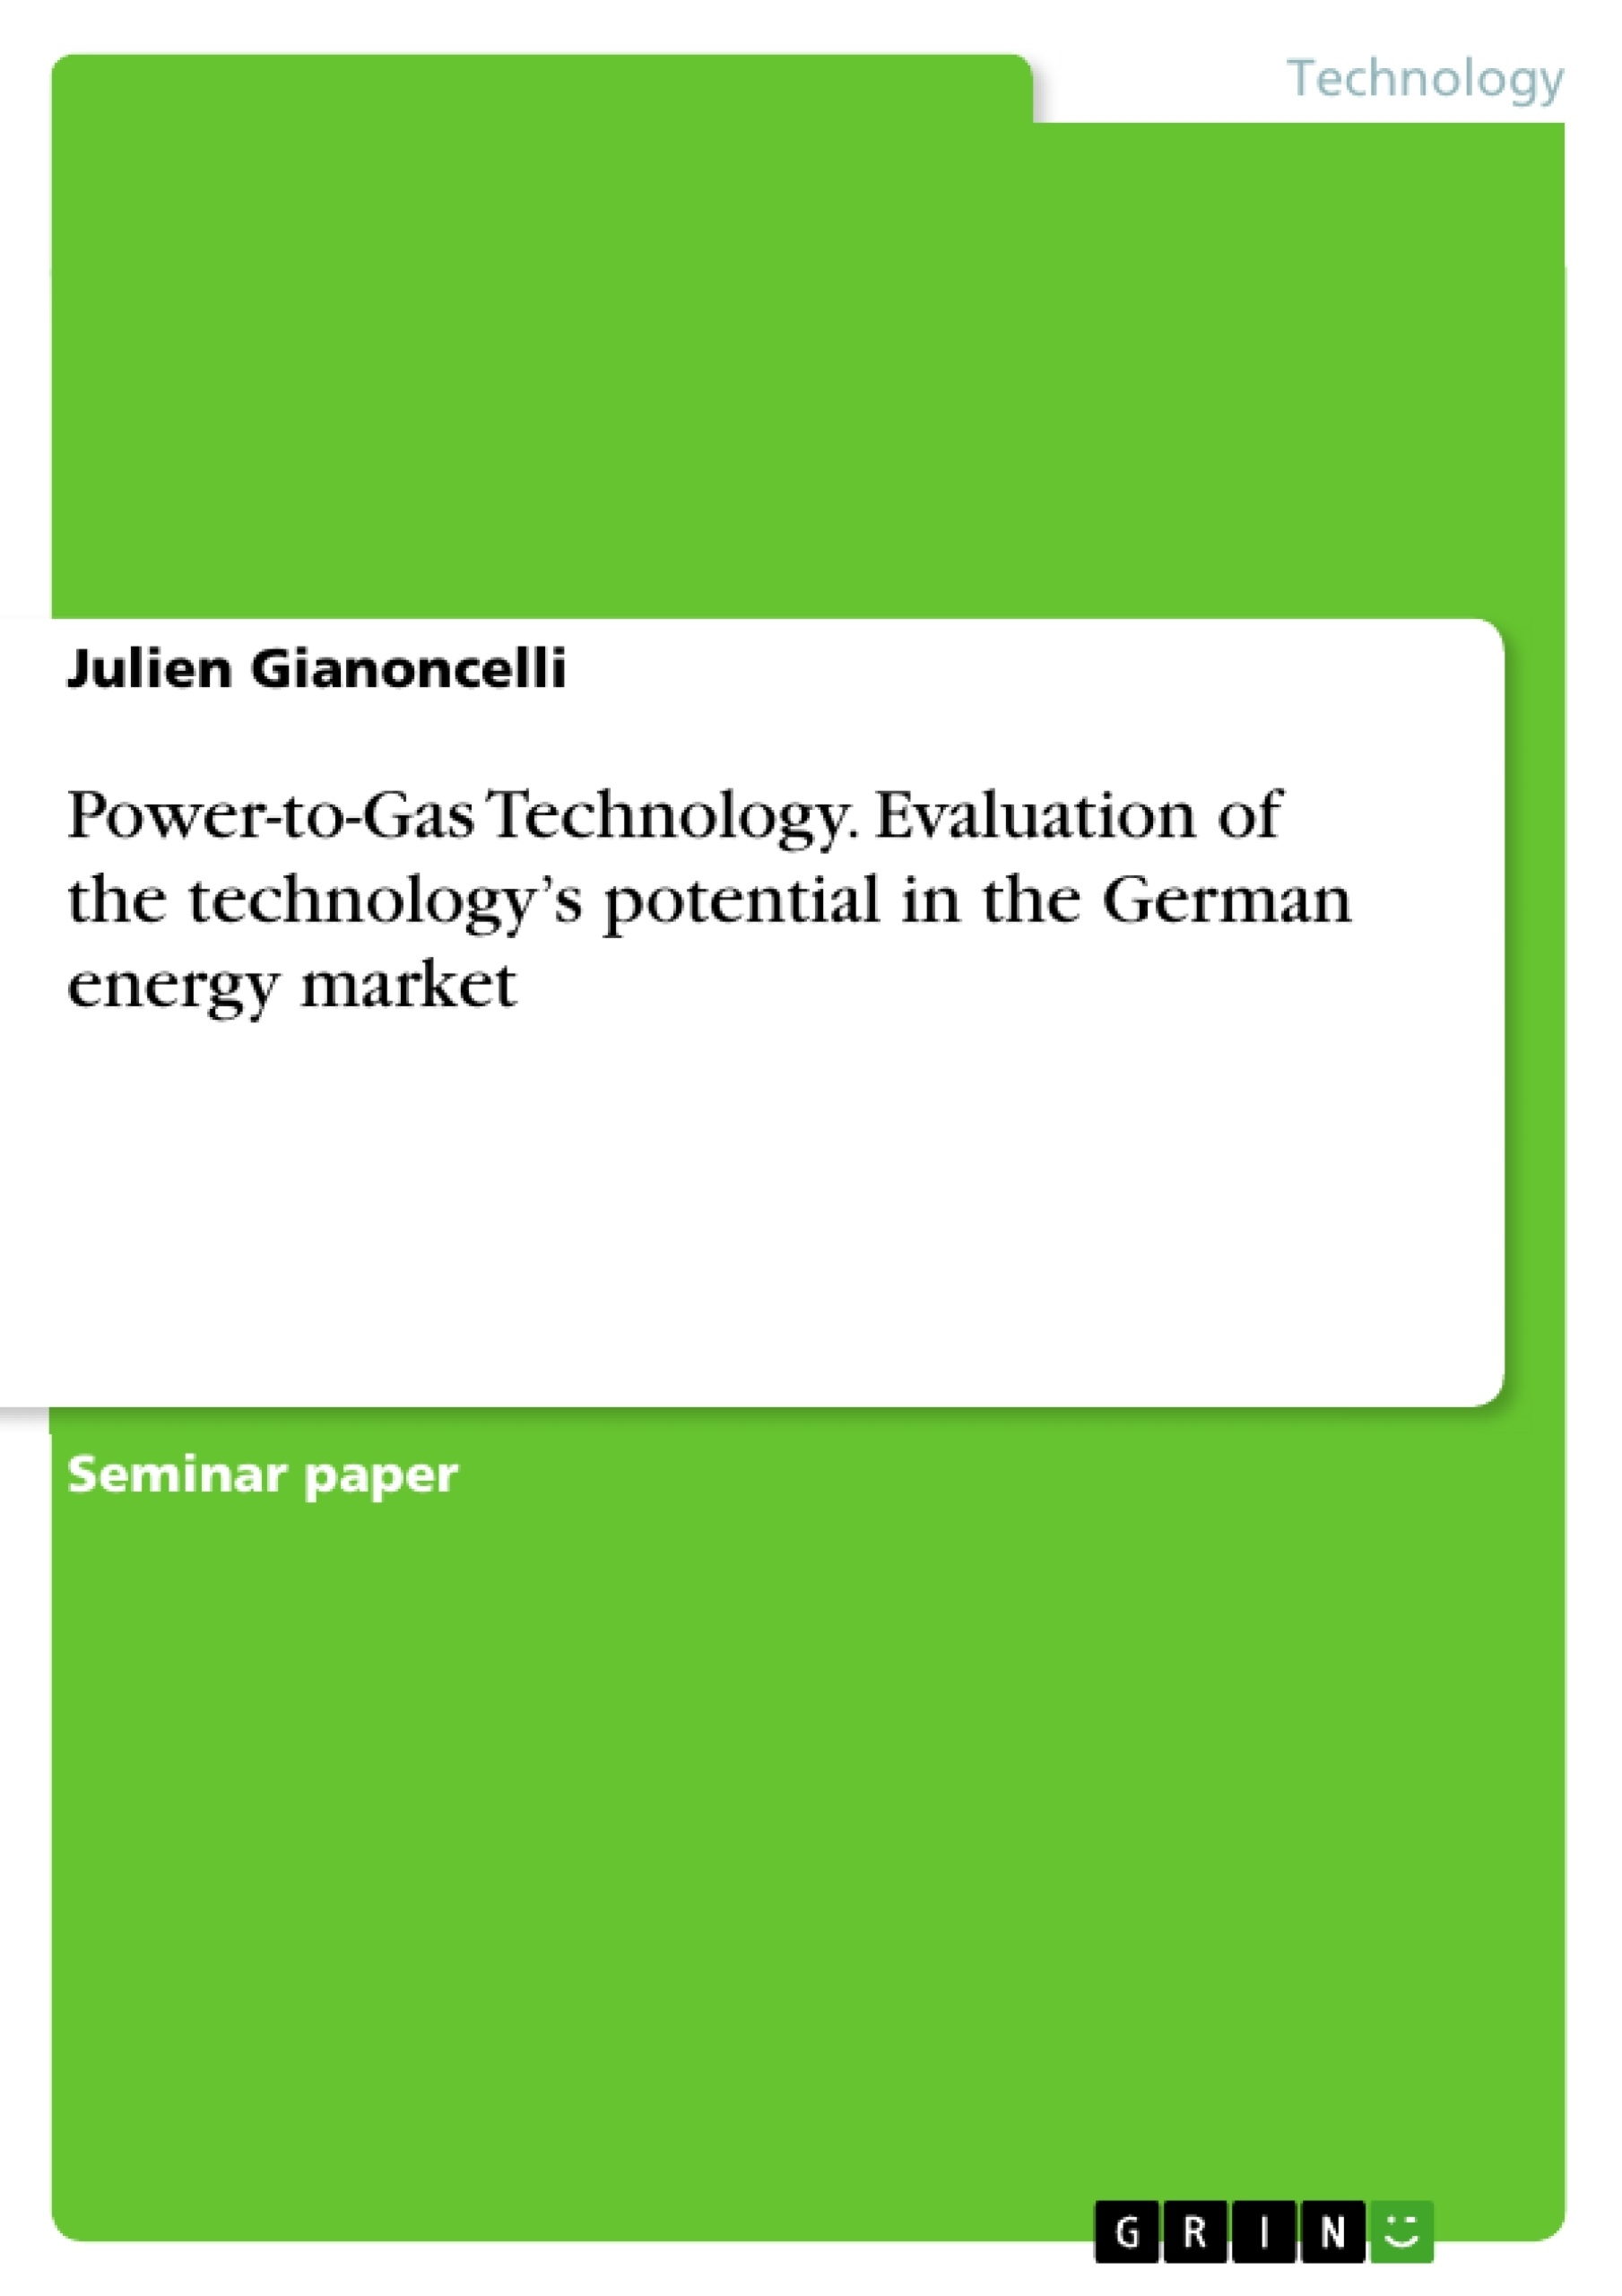 Título: Power-to-Gas Technology. Evaluation of the technology’s potential in the German energy market